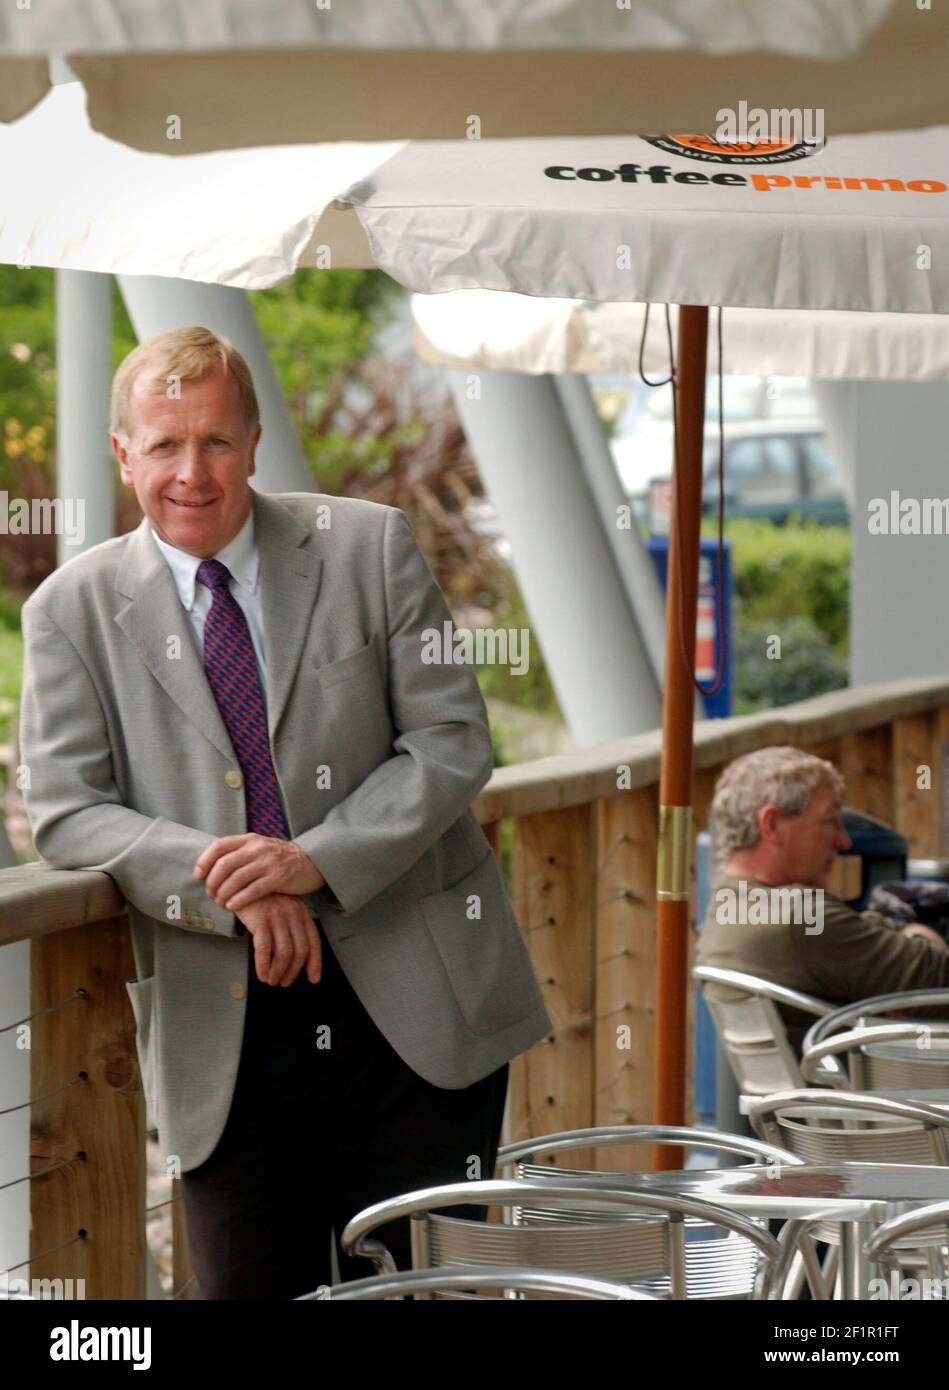 THE CHIEF EXEC OF WELCOME BREAK GEORGE CHANTER AT THE SOUTH MIMMS SERVIVE AREA. 31 May 2005 TOM PILSTON Stock Photo